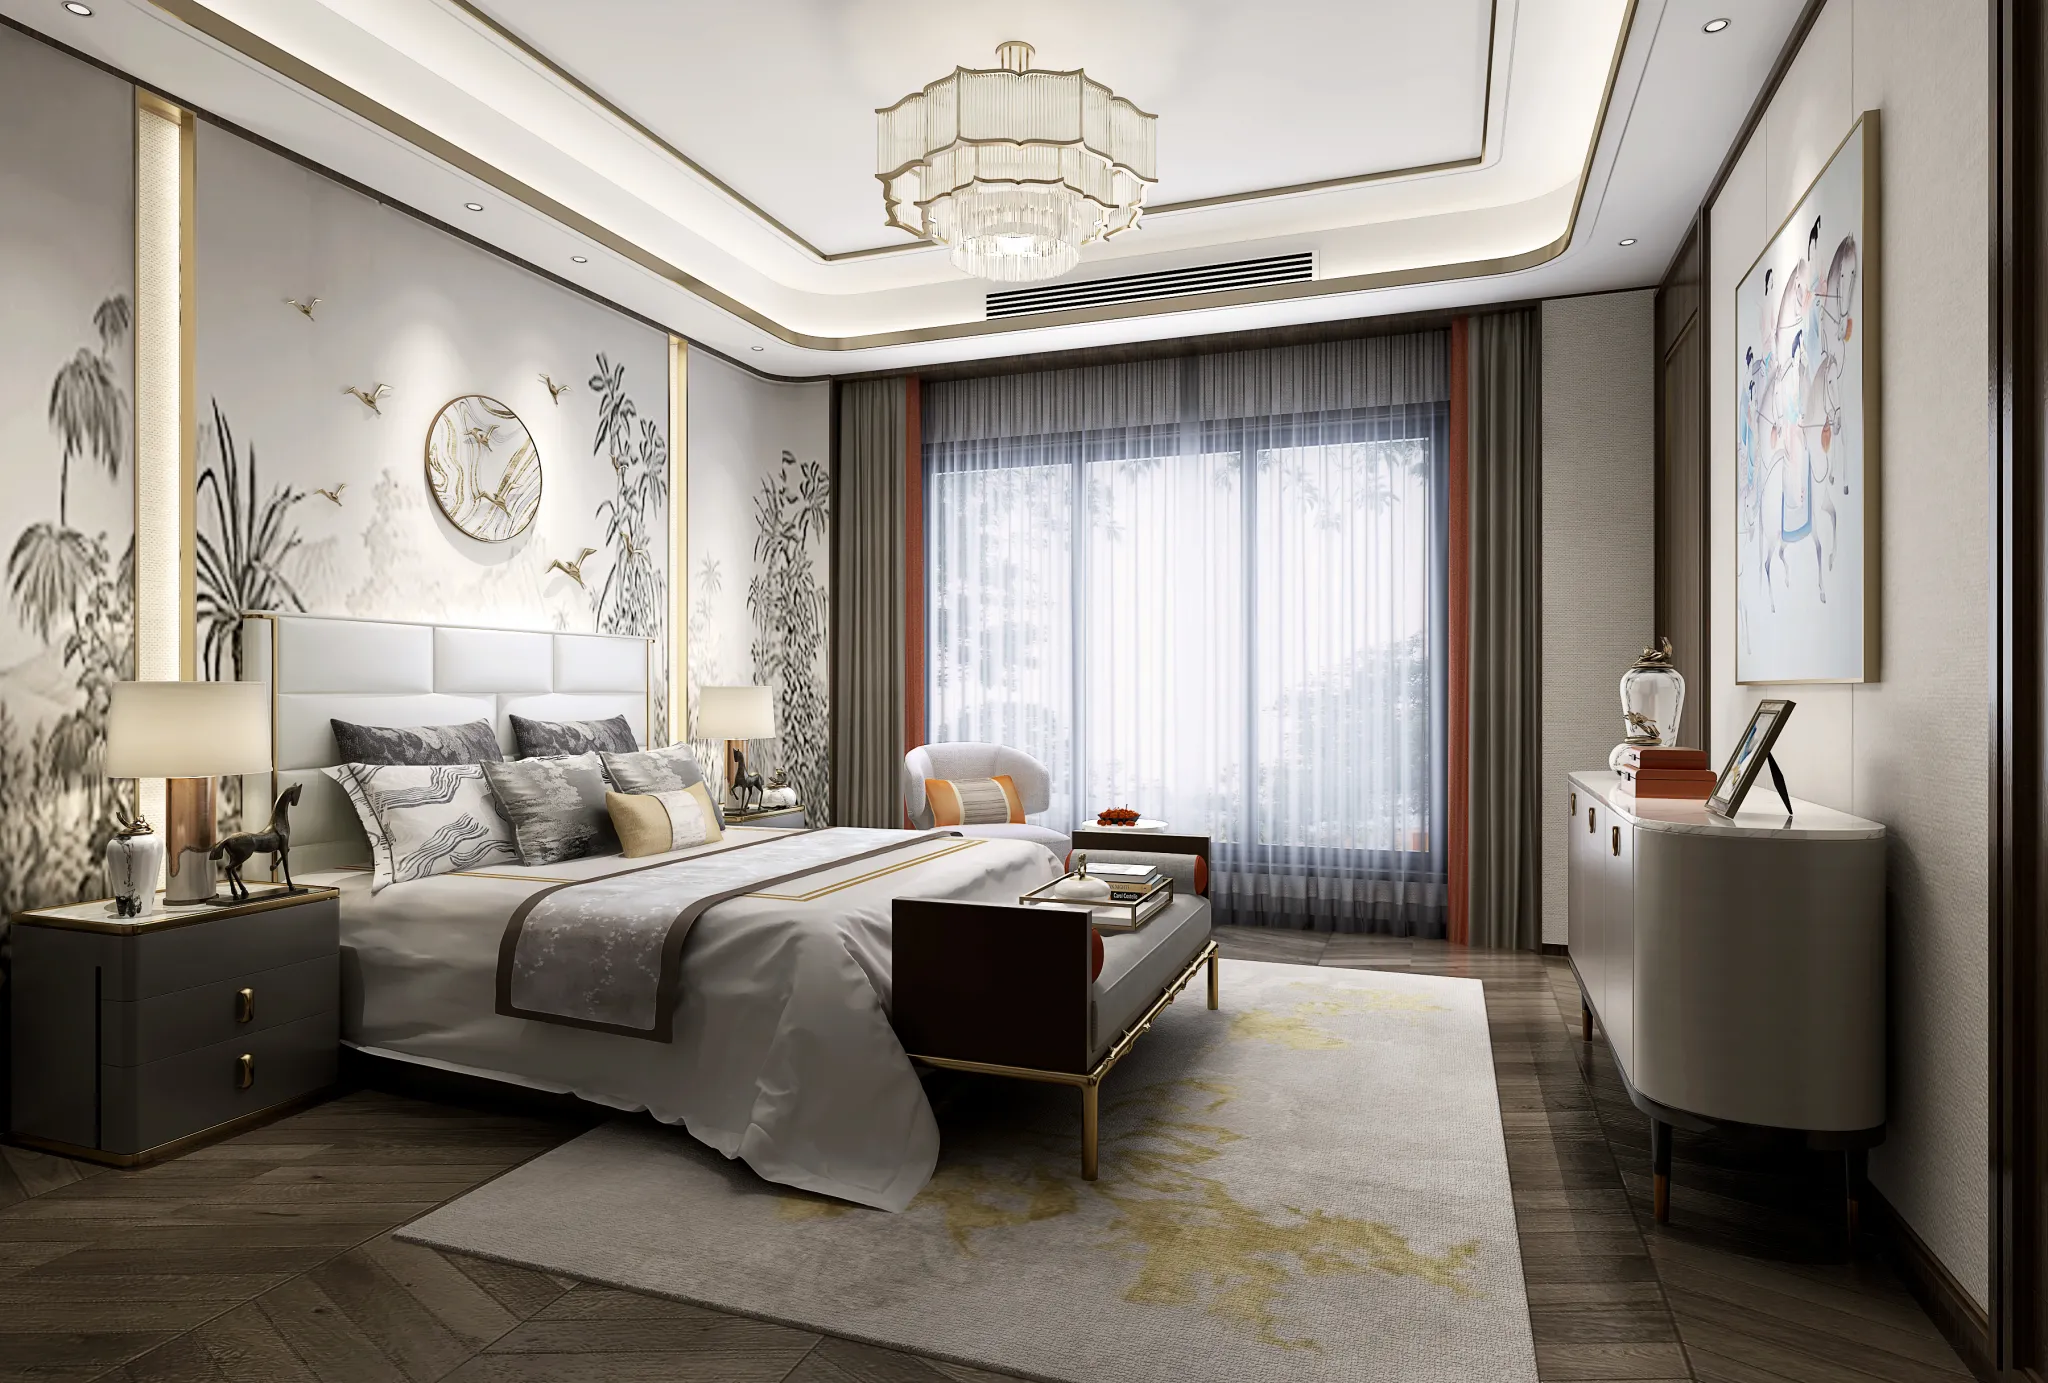 DESMOD INTERIOR 2021 (VRAY)/5. BEDROOM – 2. CHINESE STYLES – 106